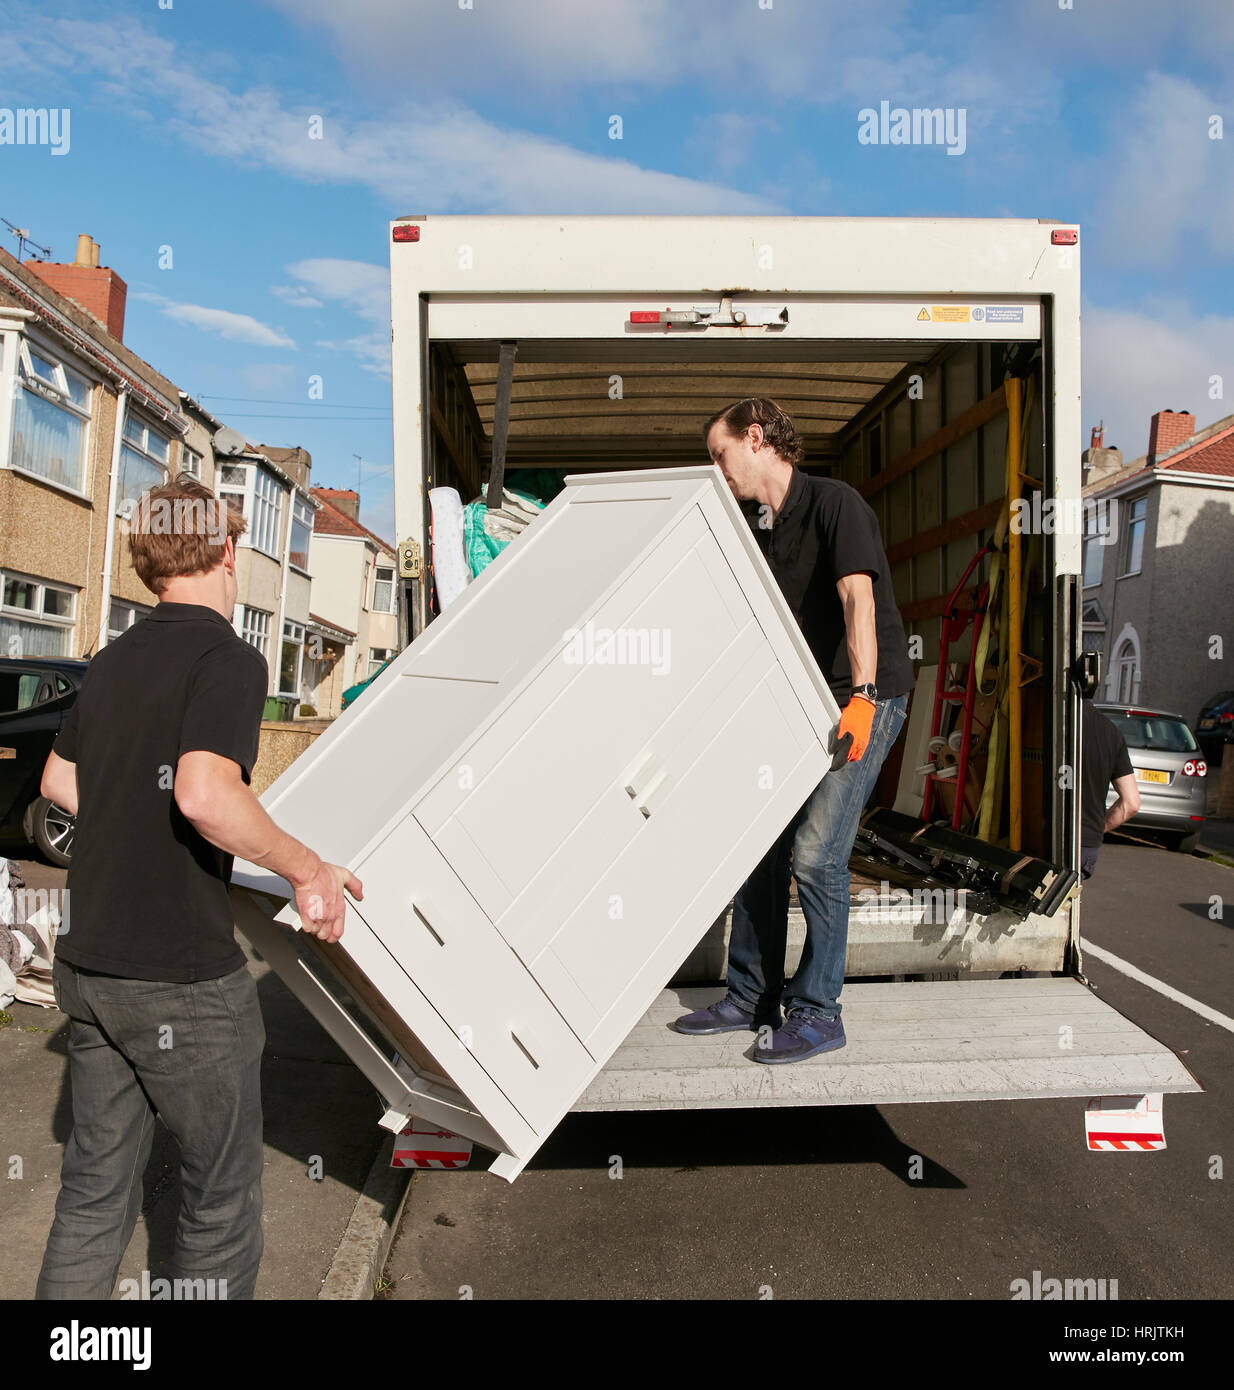 Removals business. Two men lifting a wardrobe onto the removals van. Stock Photo